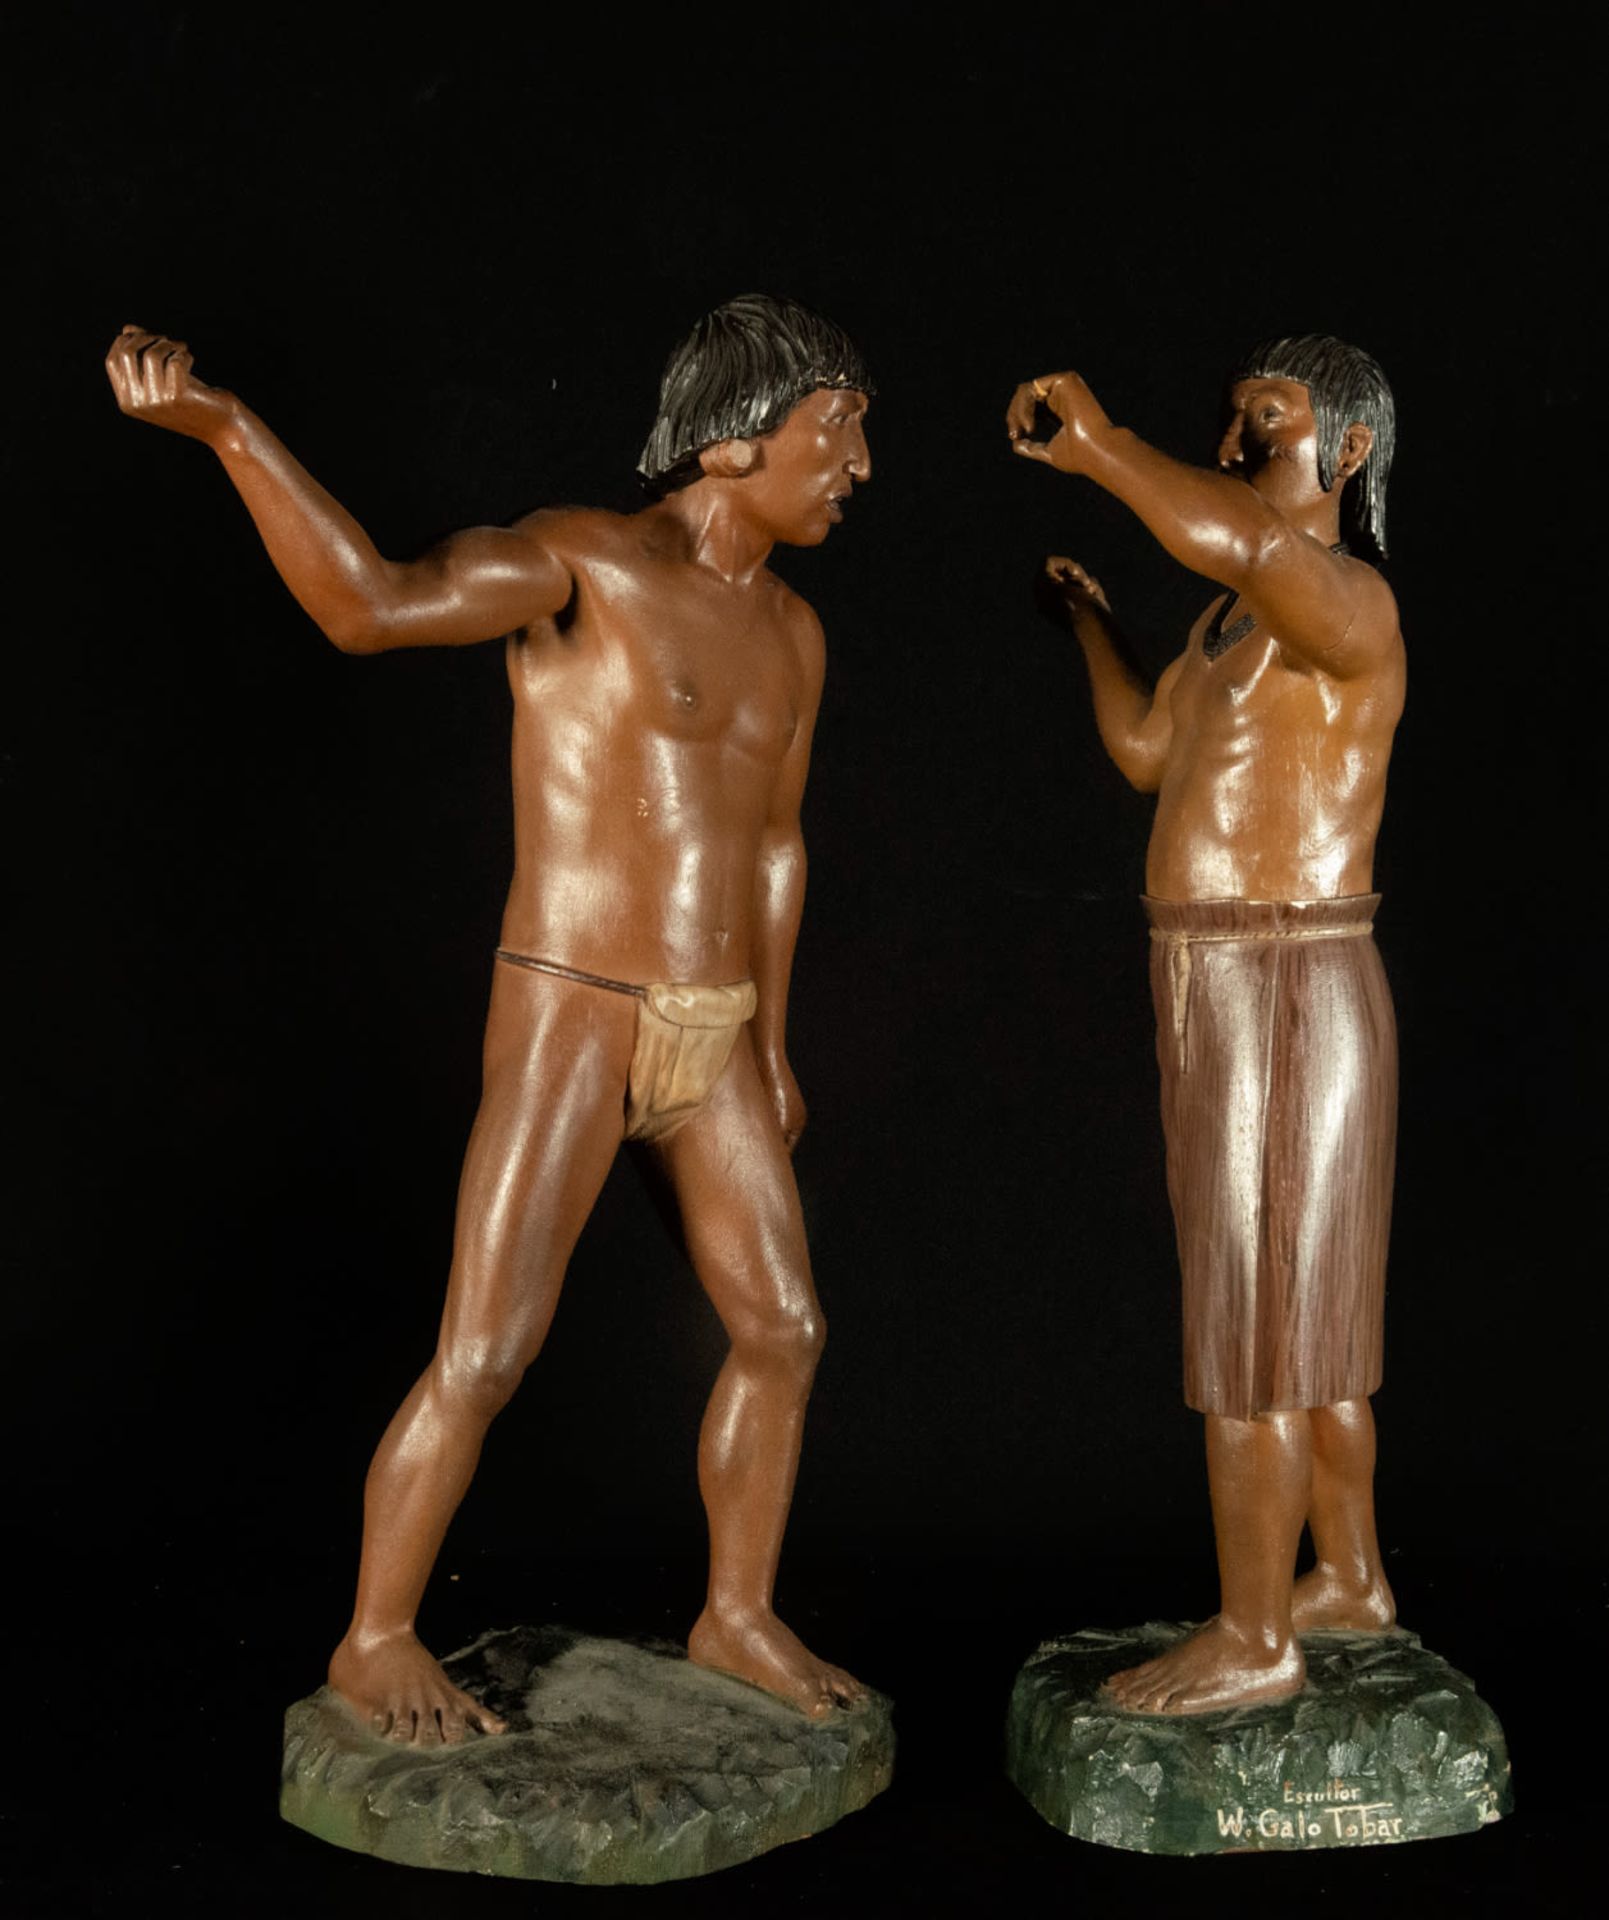 Galo Tobar, year 1974, Pair of exquisite sculptures of Matsés Indians from Brazil, 70s - Image 2 of 6